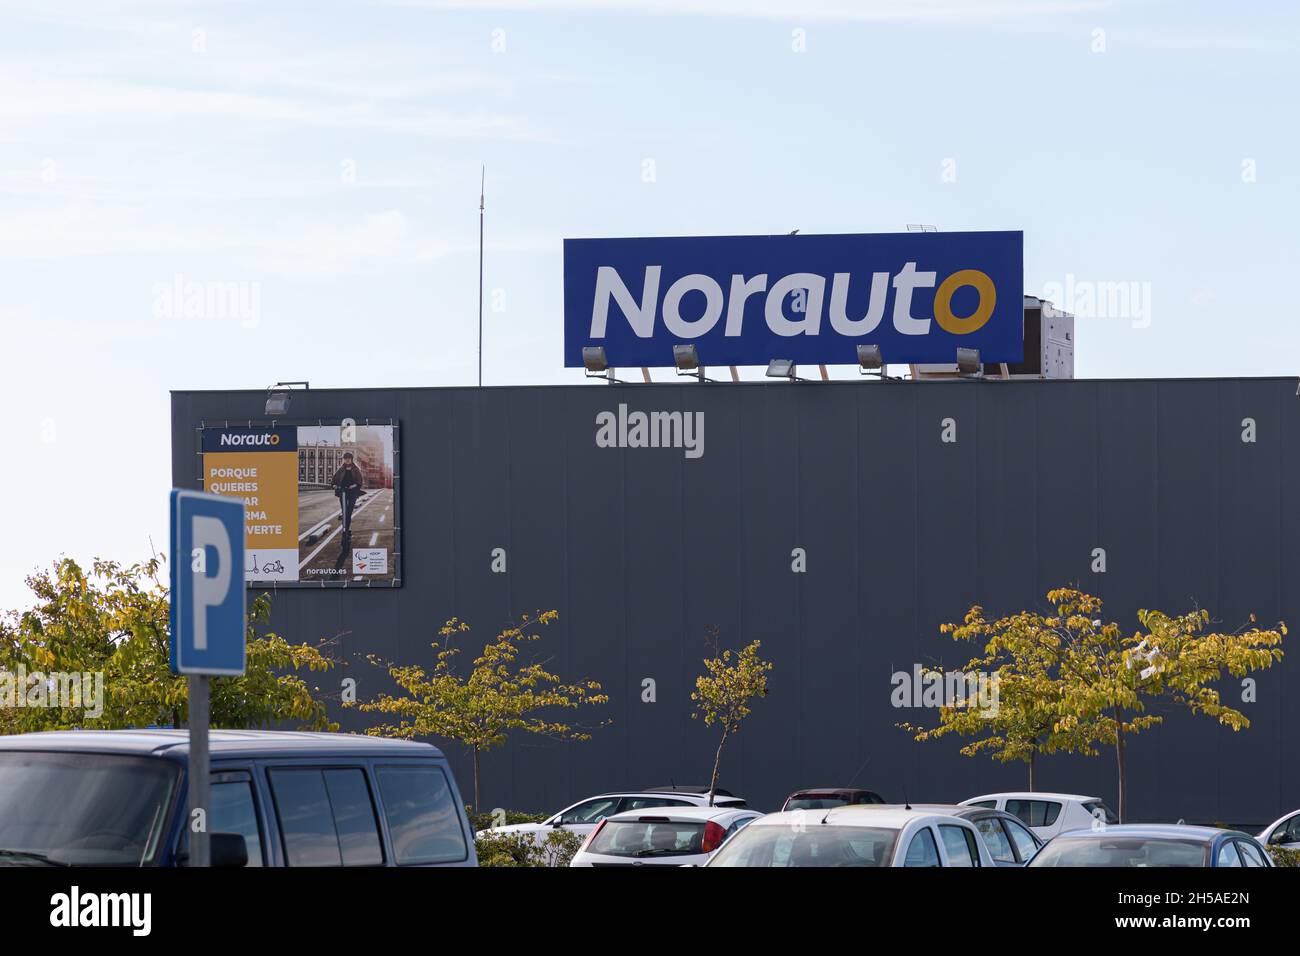 LA ELIANA, SPAIN - OCTOBER 27, 2021: Norauto is a French company which focuses on car repairs, car accessories and car parts Stock Photo